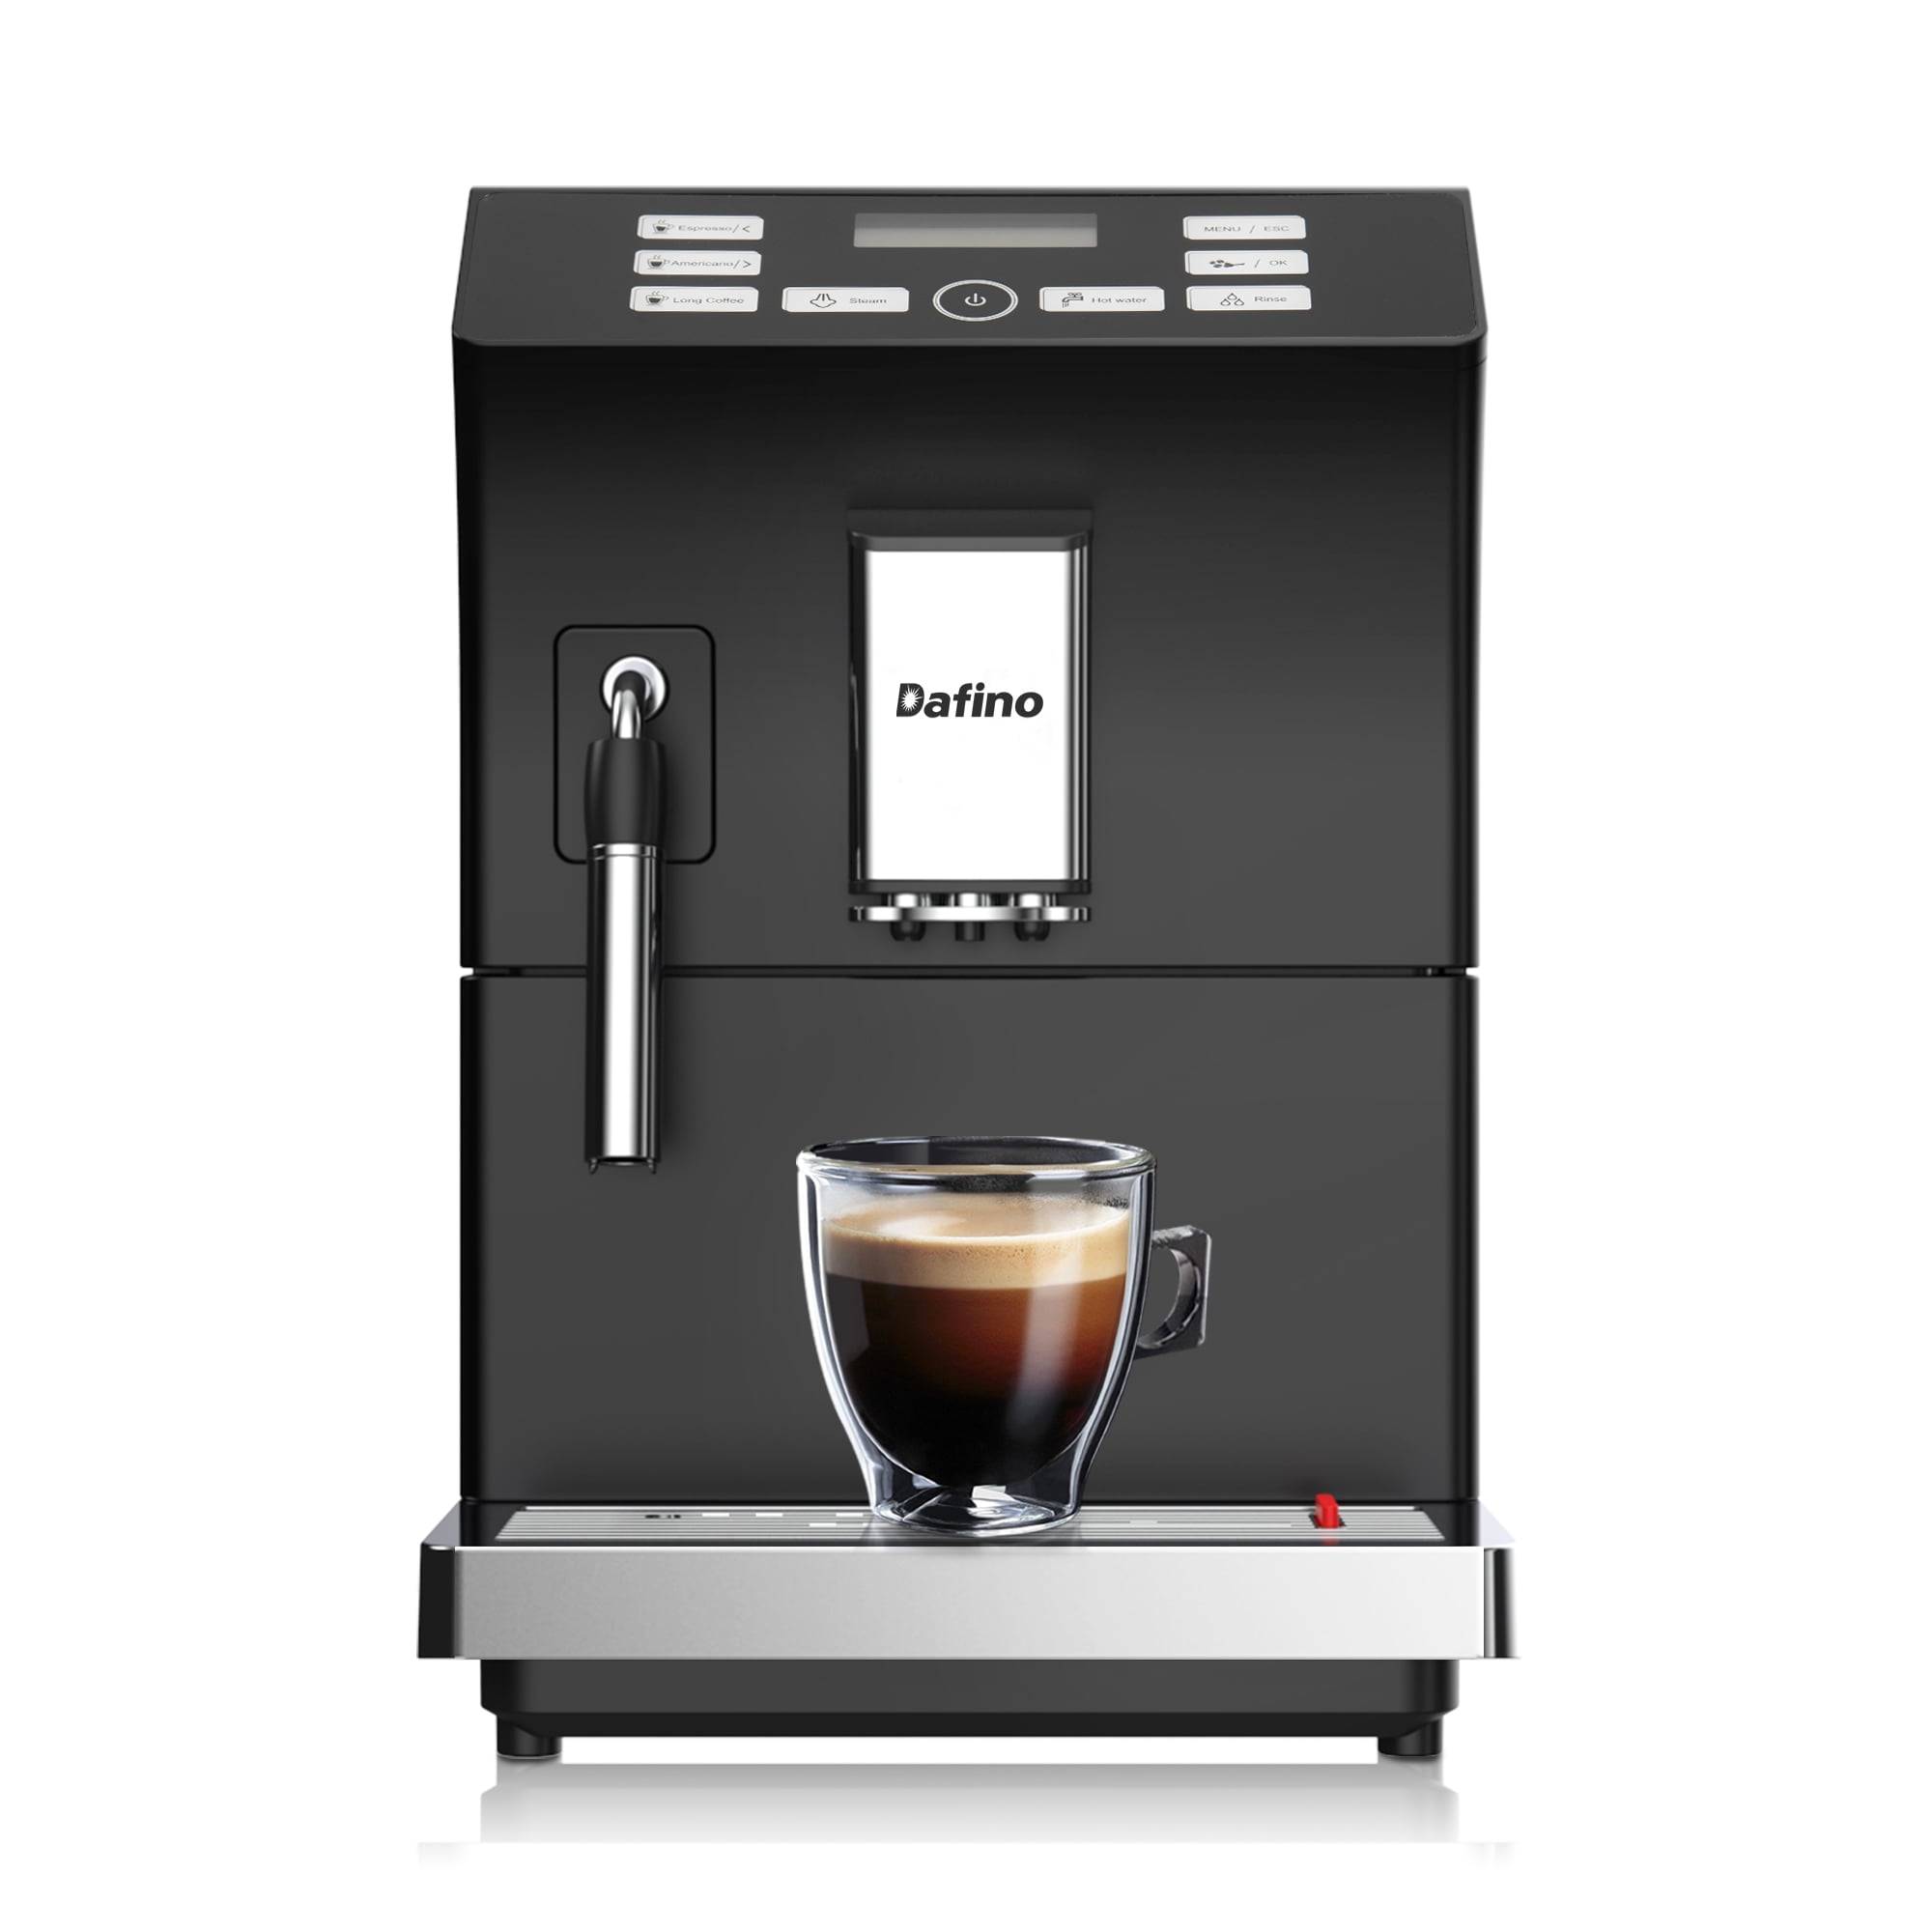 Baumann Living - Straight-up espresso, mellow Americano, cappuccino, creamy  latte or something in between? Whether you like your coffee full-strength  or mild, black or milky, the new 2-in-1 Espresso and Drip Coffee